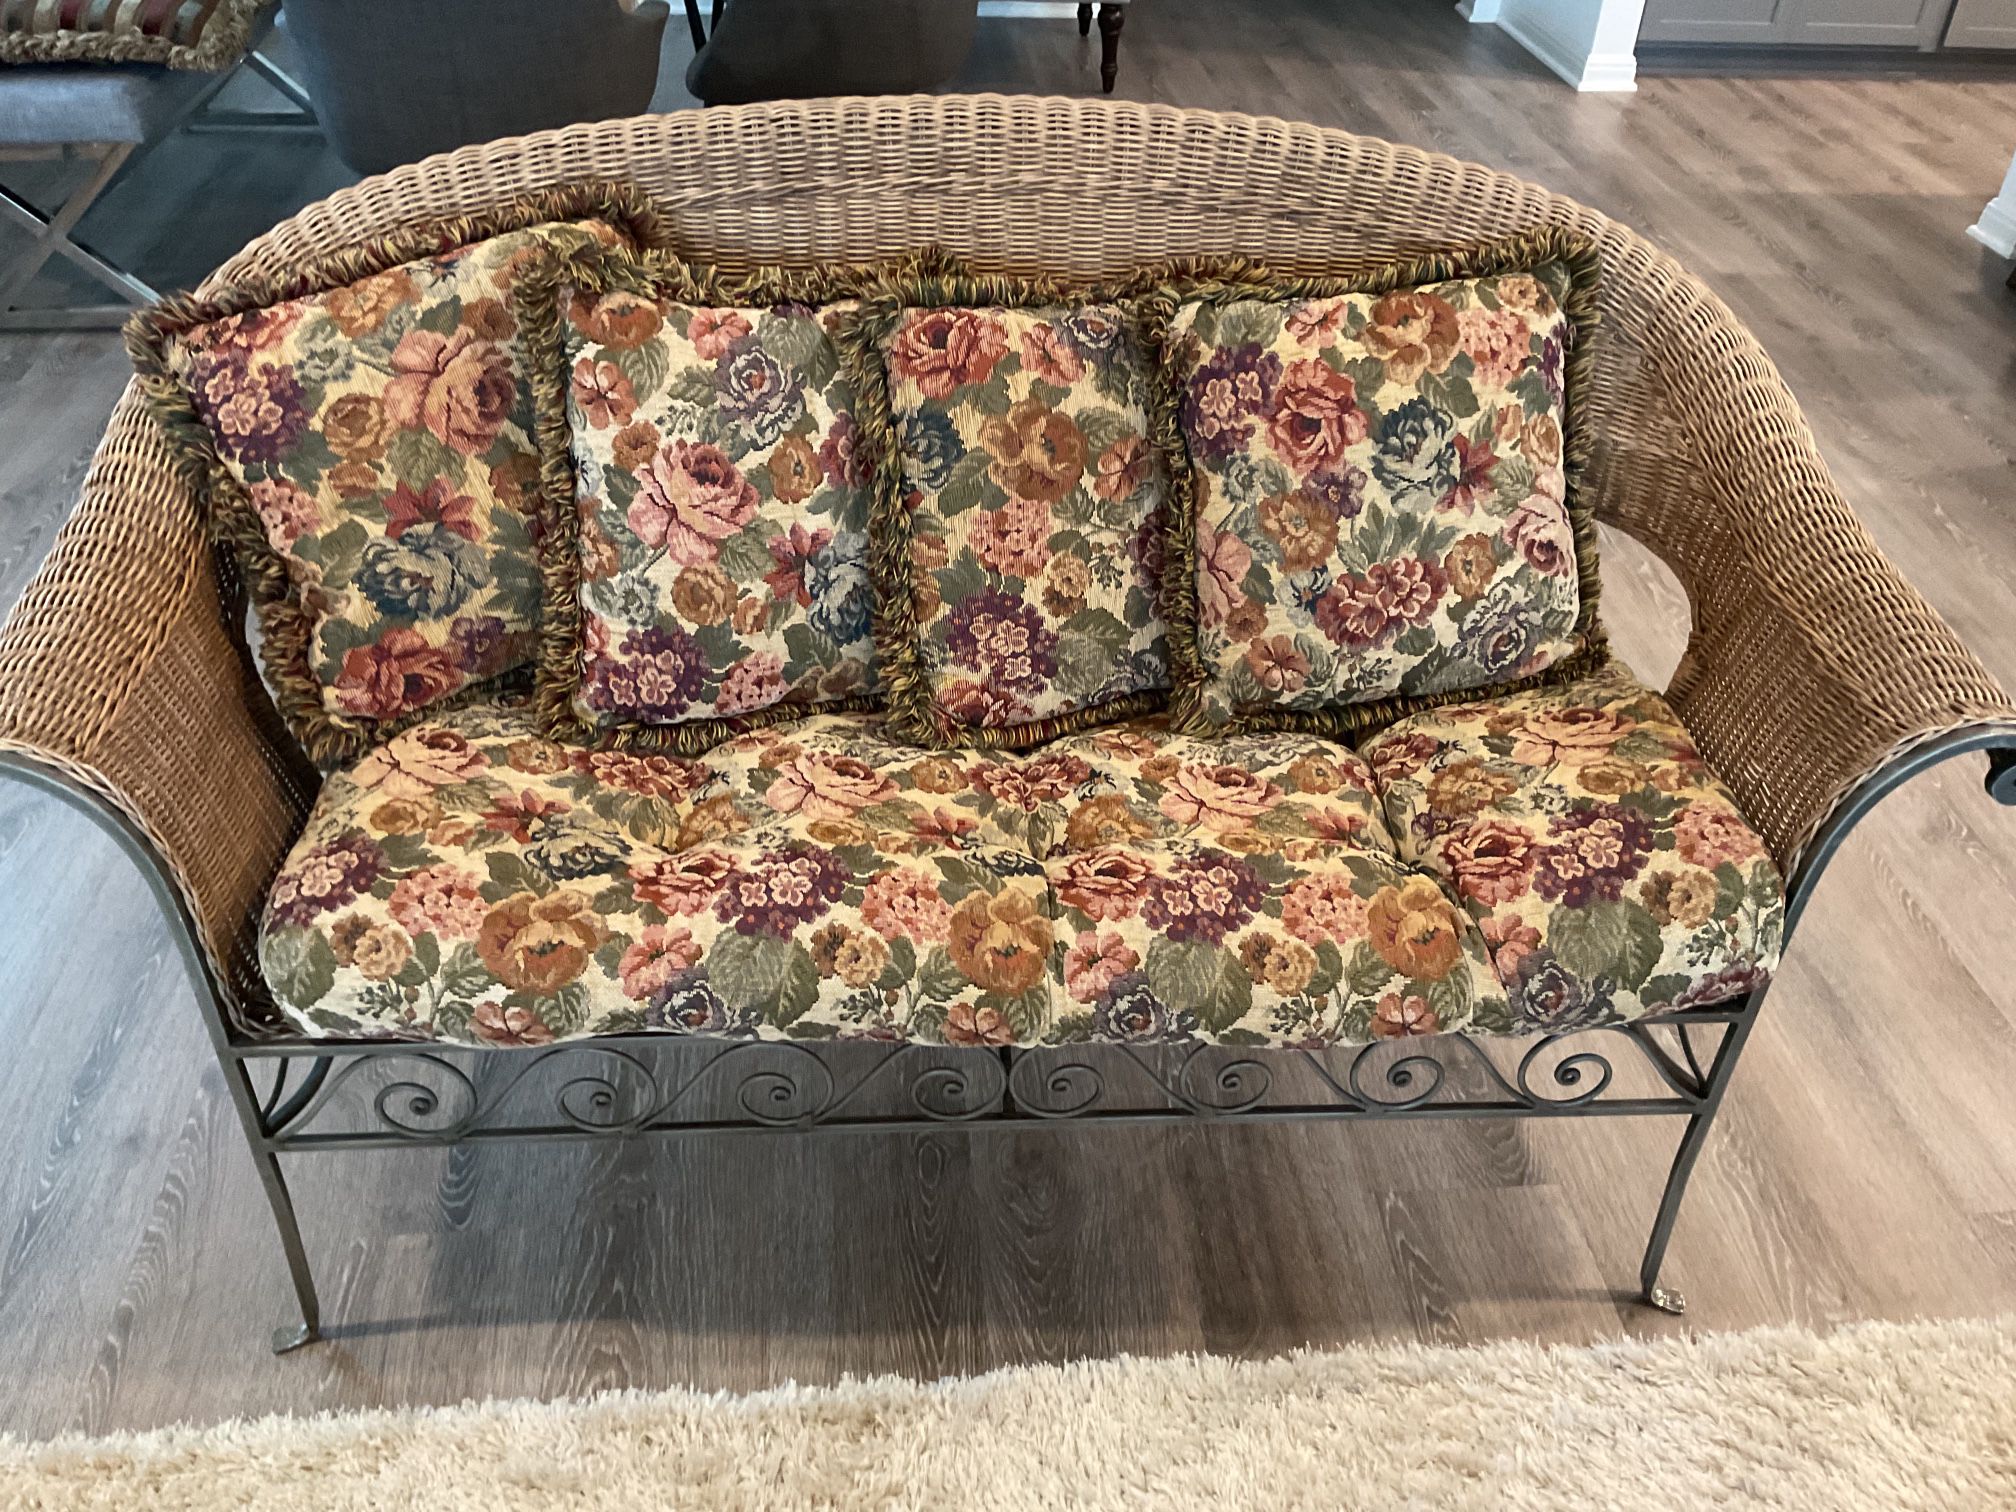 Pier One Imports Wicker/Iron Floral Loveseat